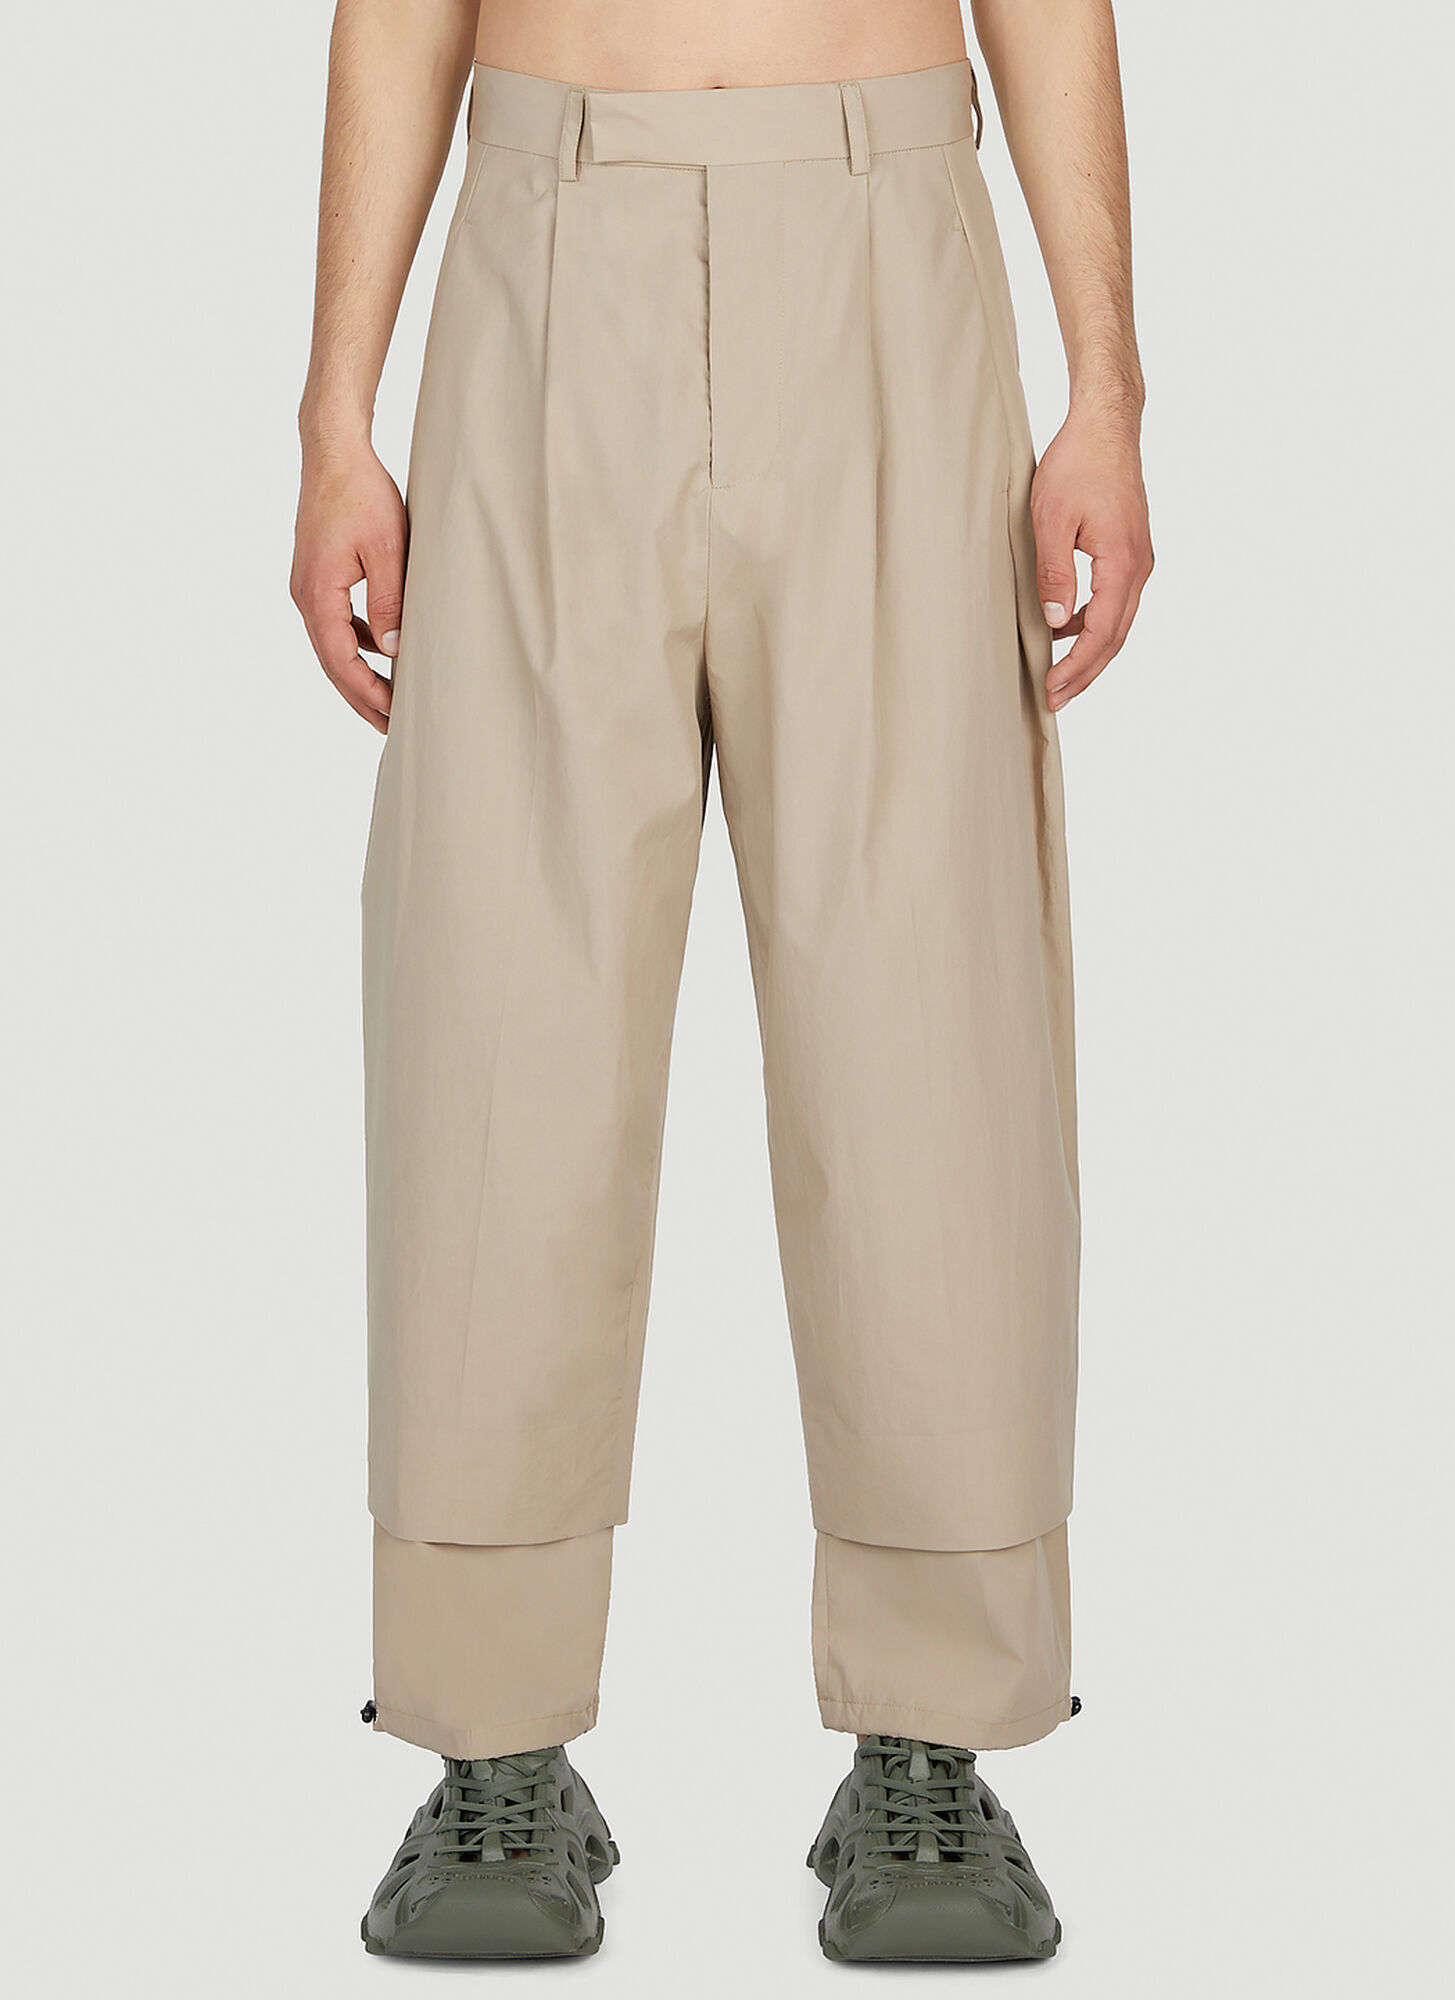 Craig Green Trousers In Beige Cotton